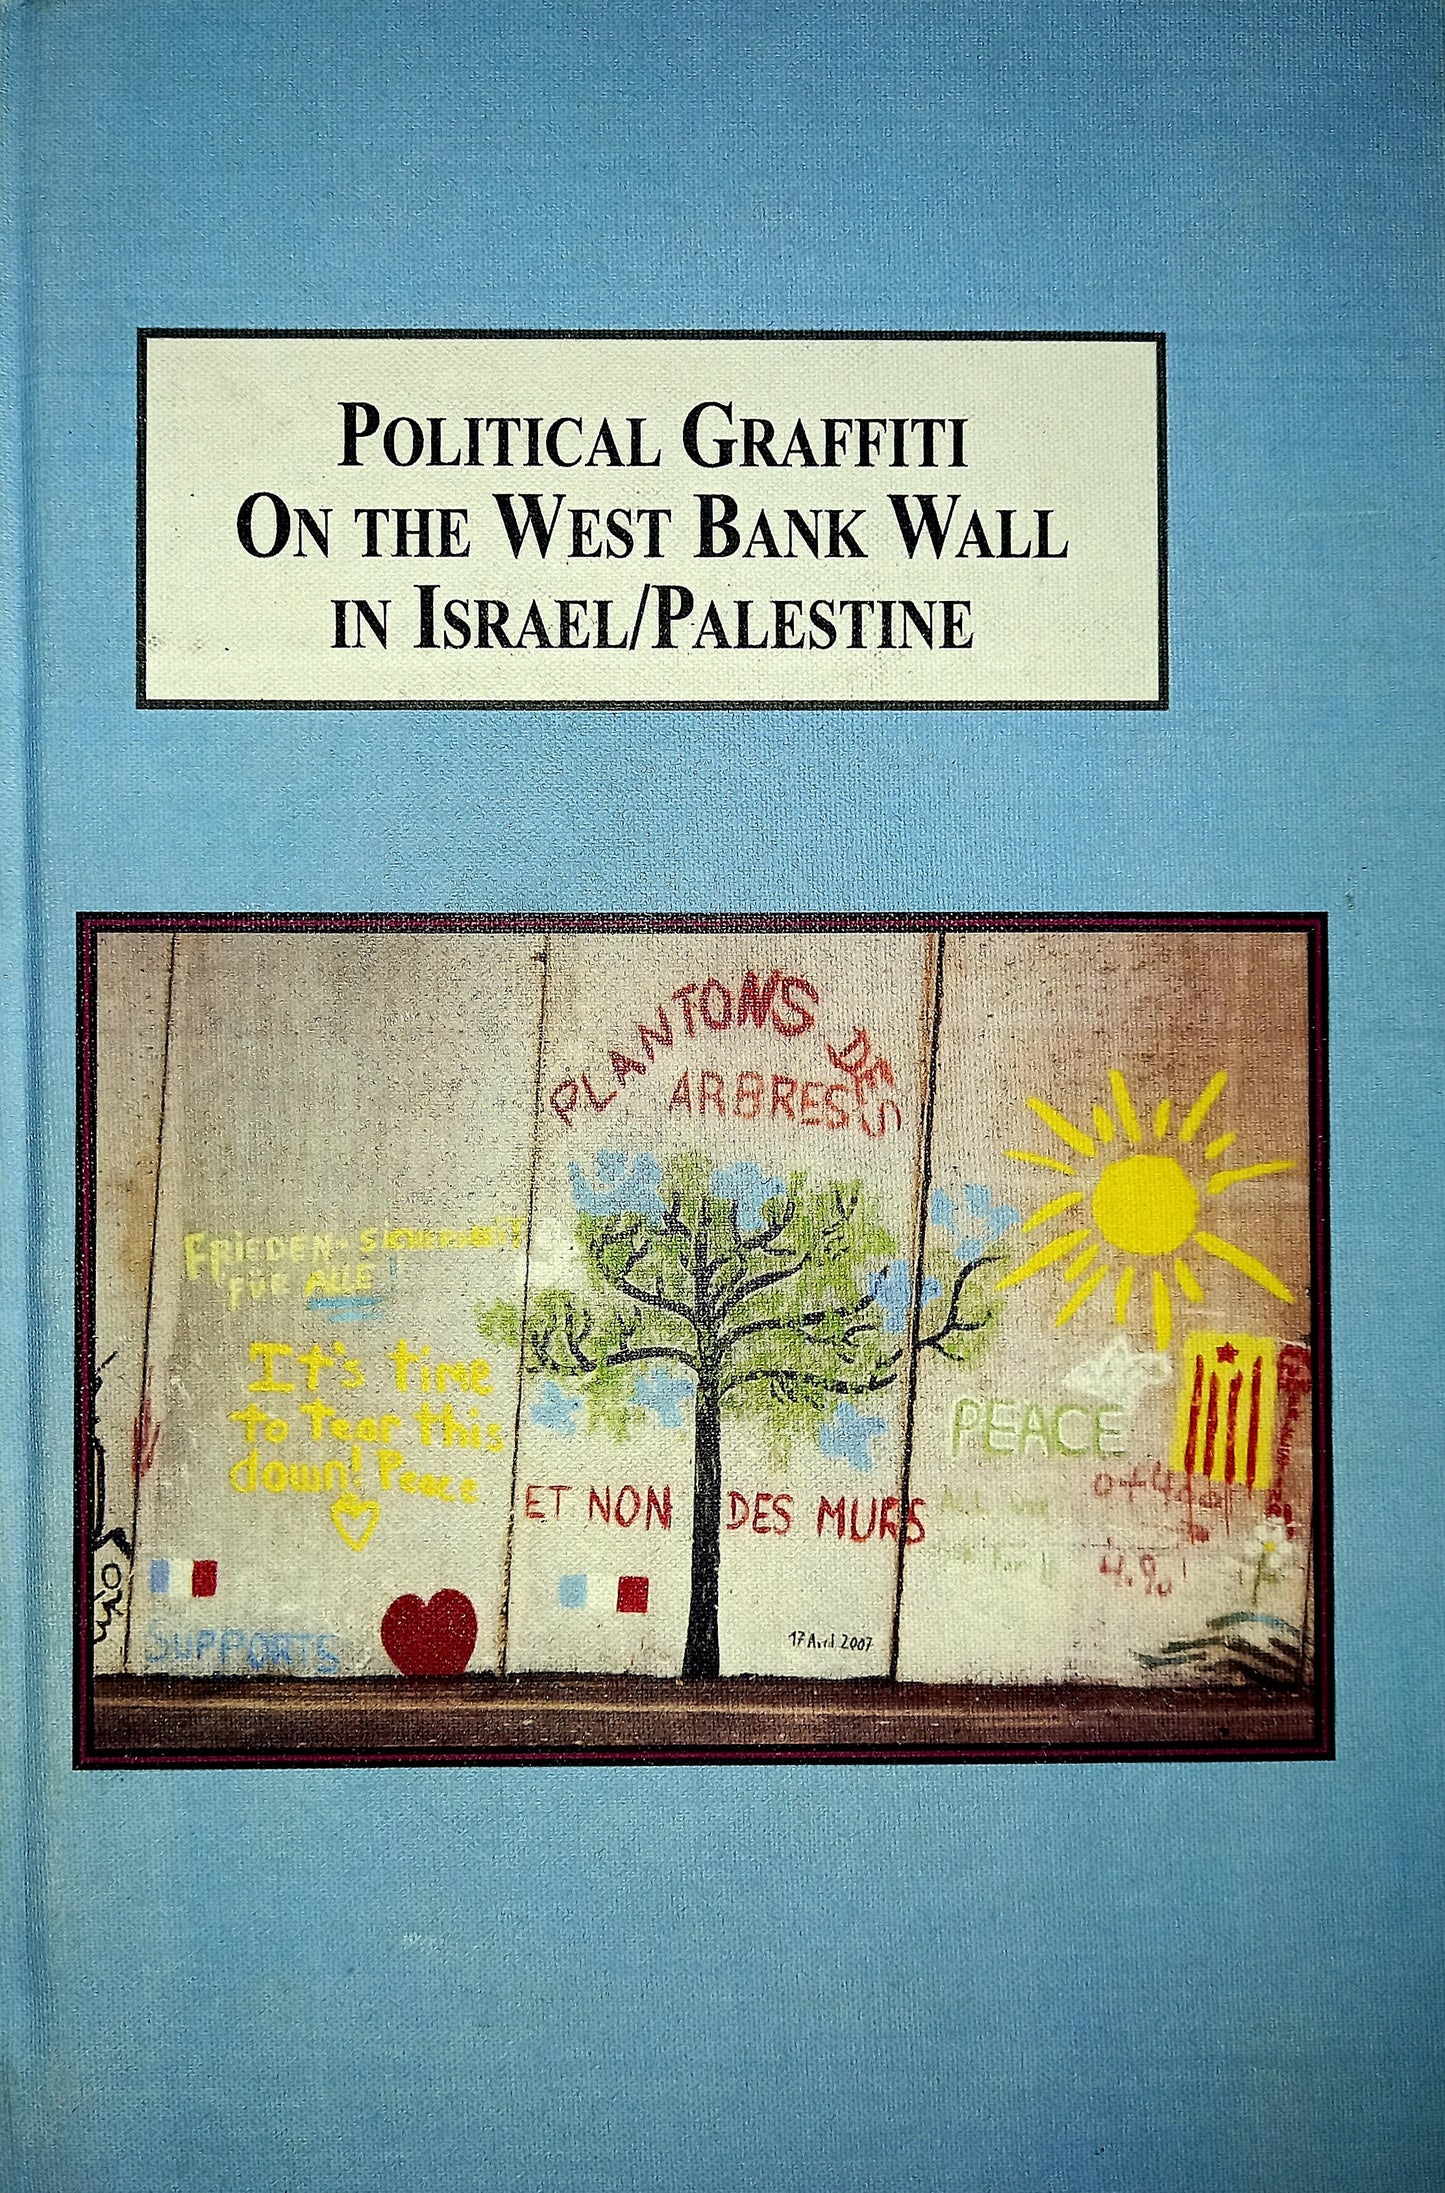 Political Graffiti on the West Bank Wall in Israel/Palestine